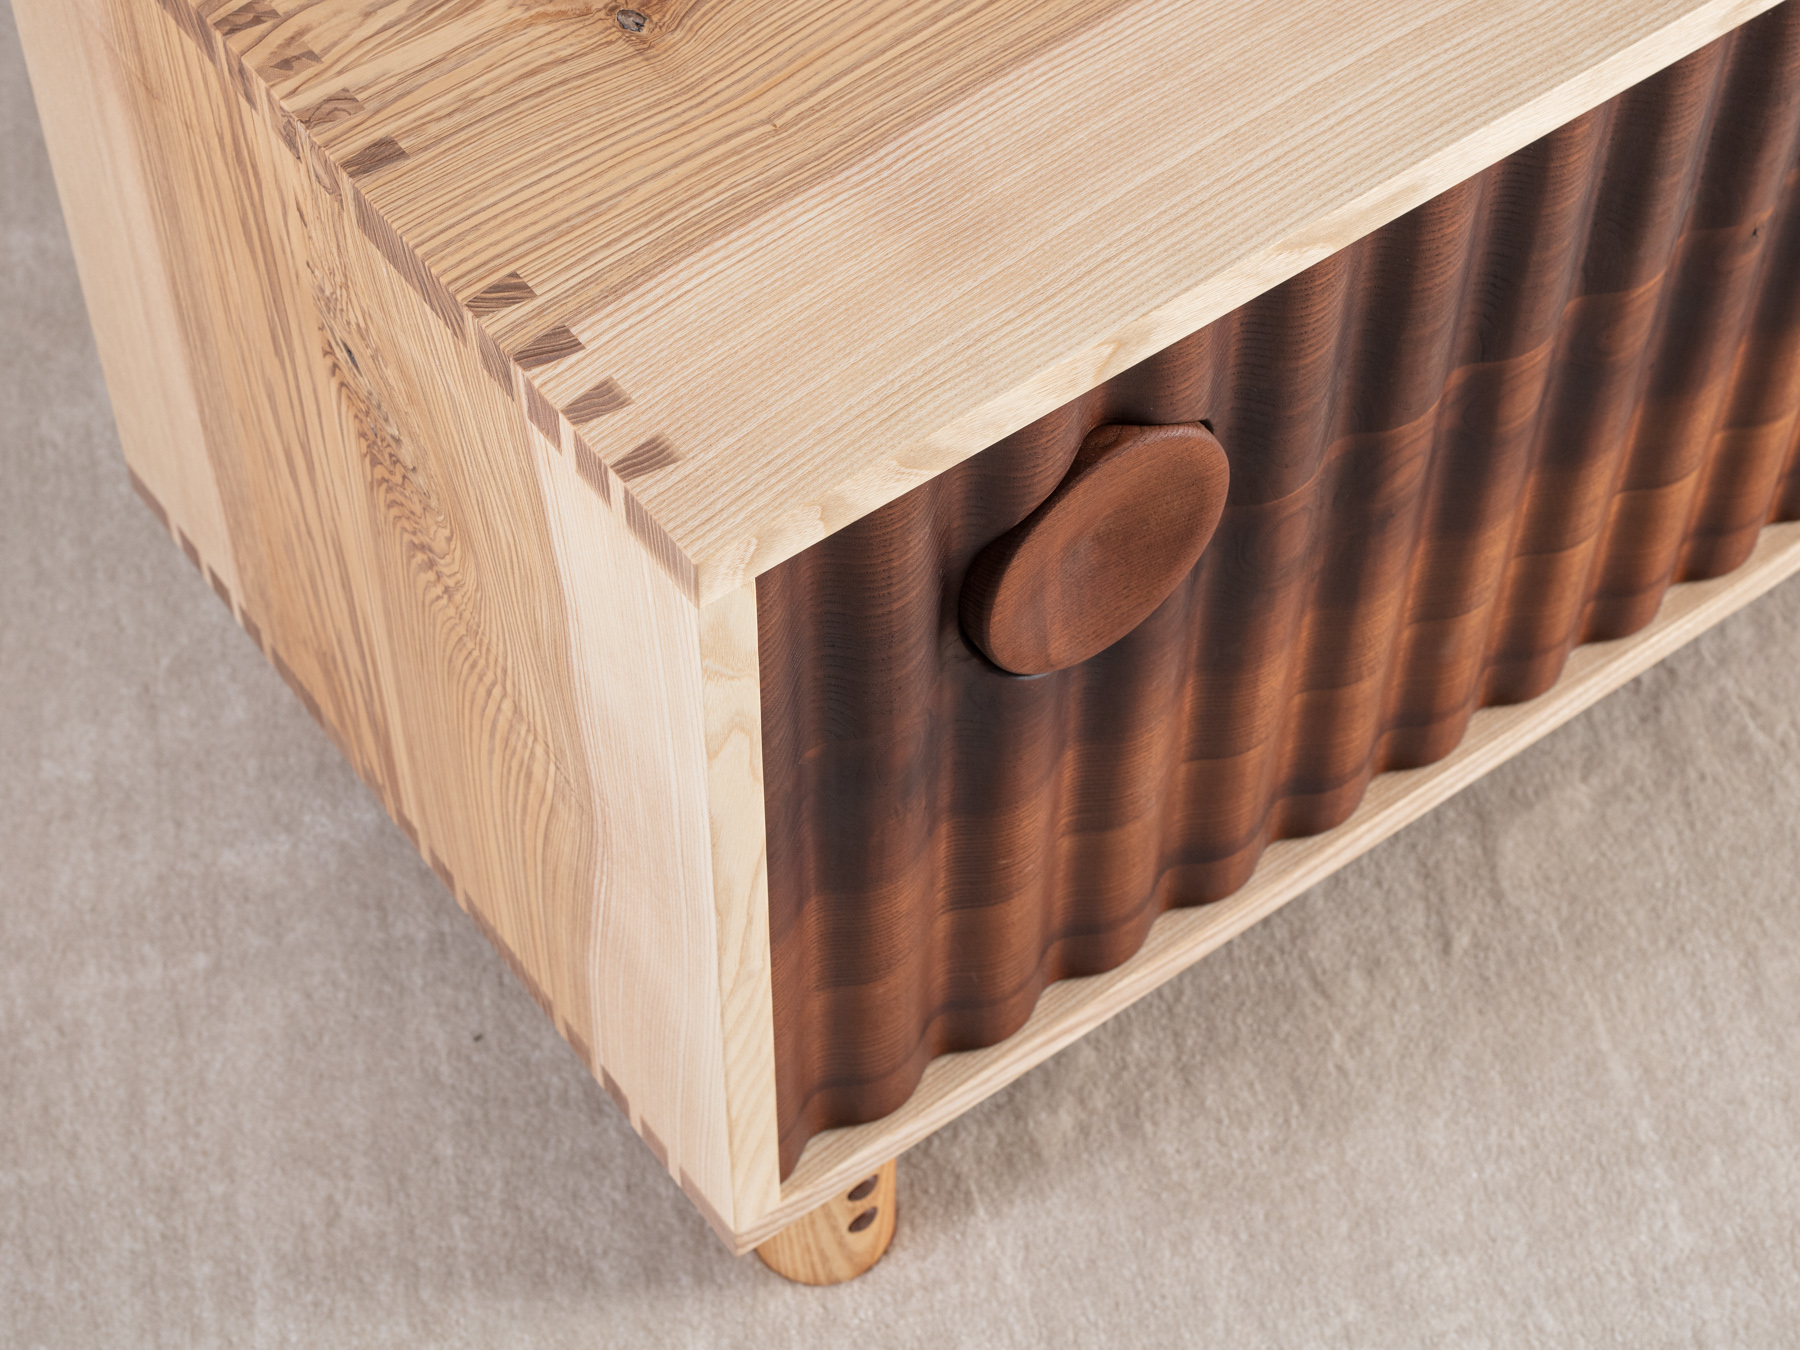 Bowater Media Unit, the signature ripple facade is digitally profiled from brown oak, hand-turned leg and handle details with a removable base, The carcass is made from solid timber with dovetail joinery